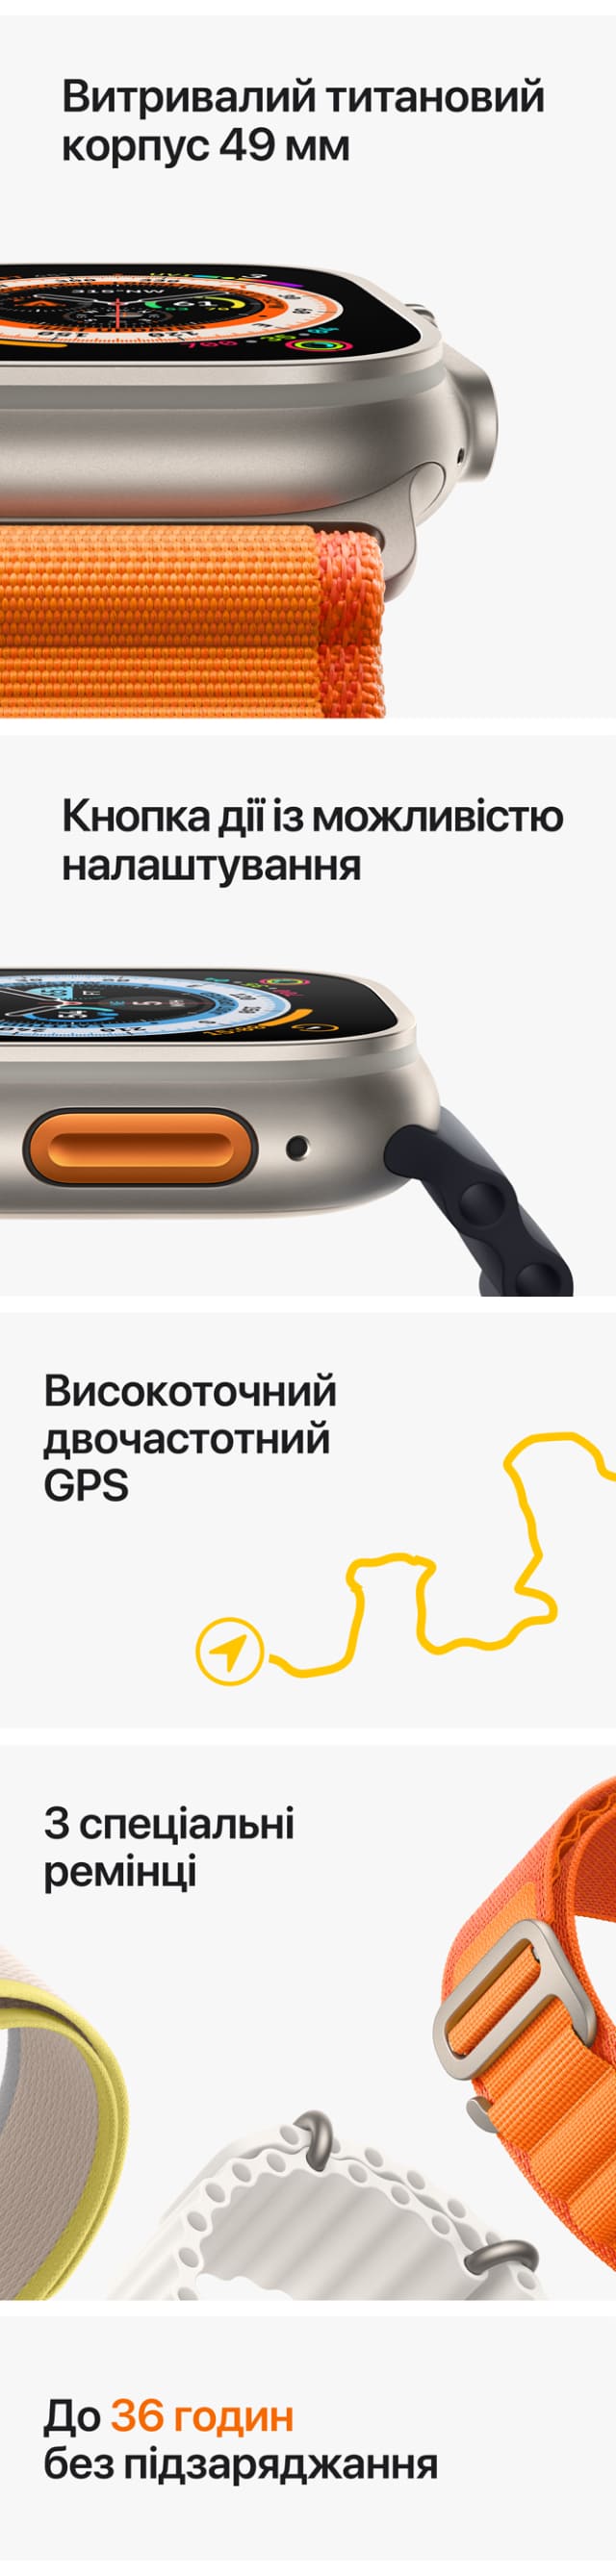 watch features image